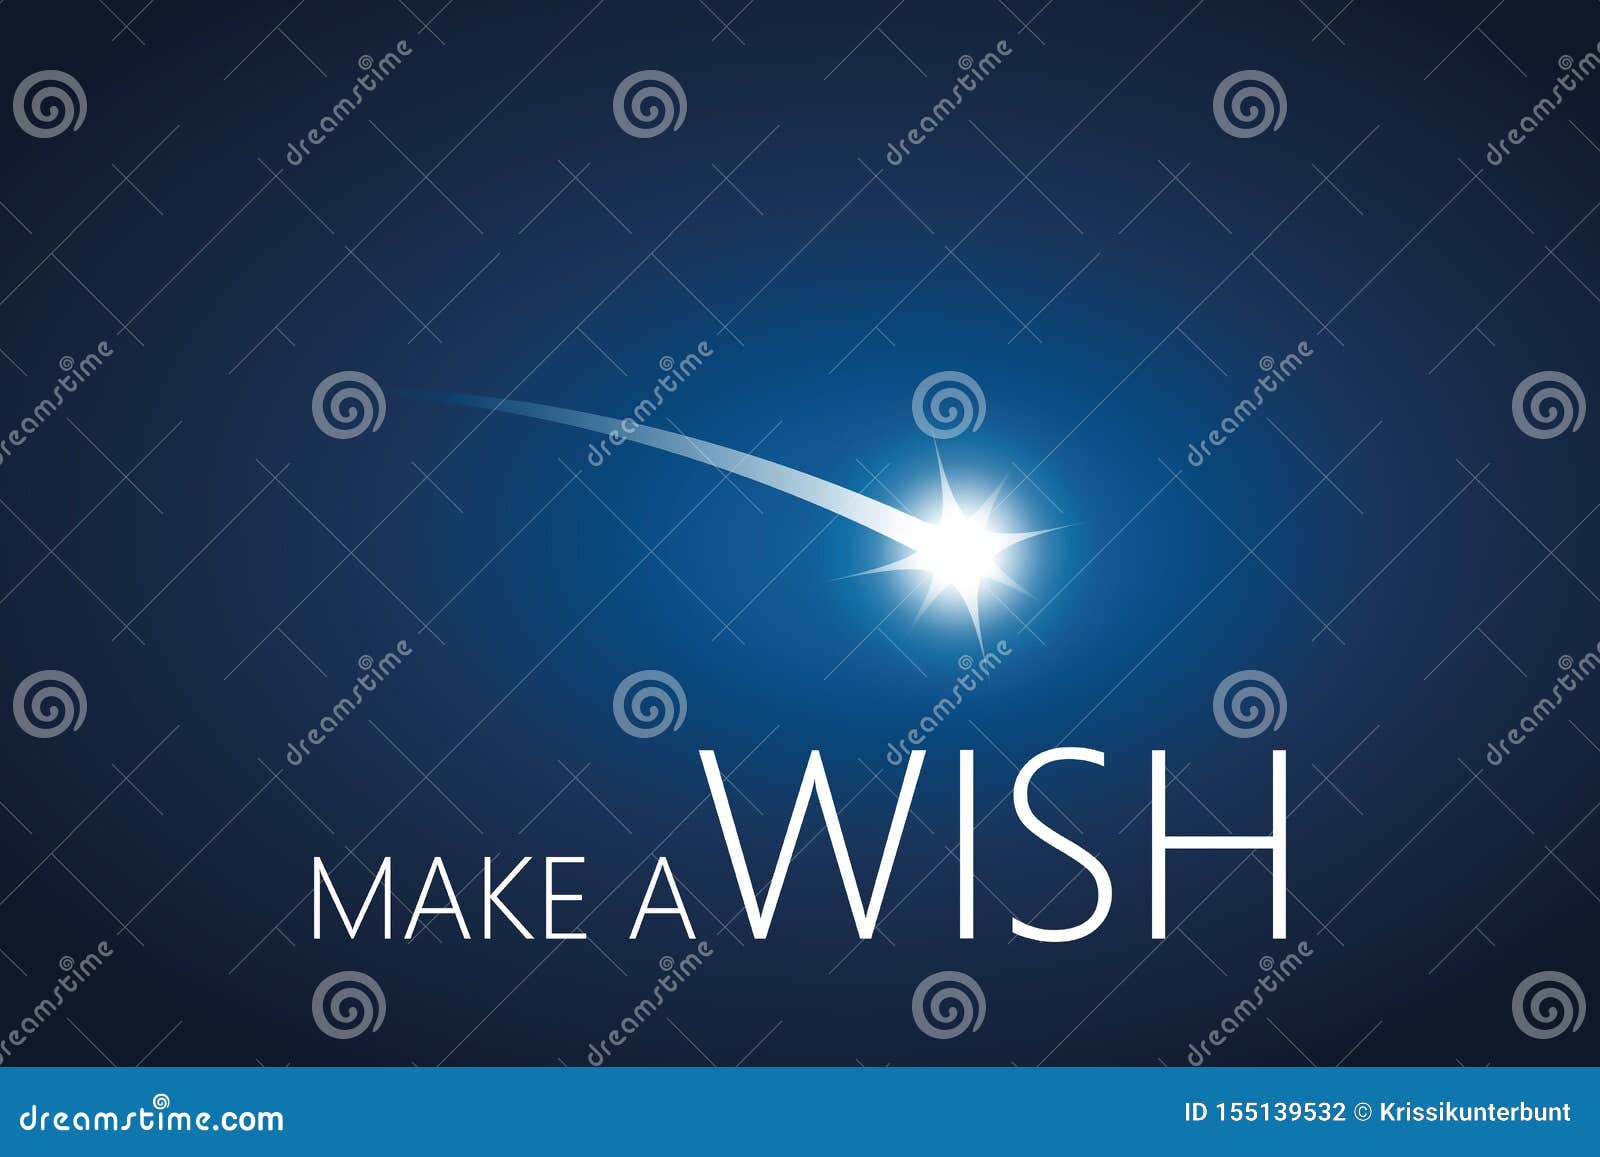 make a wish with falling star in the sky